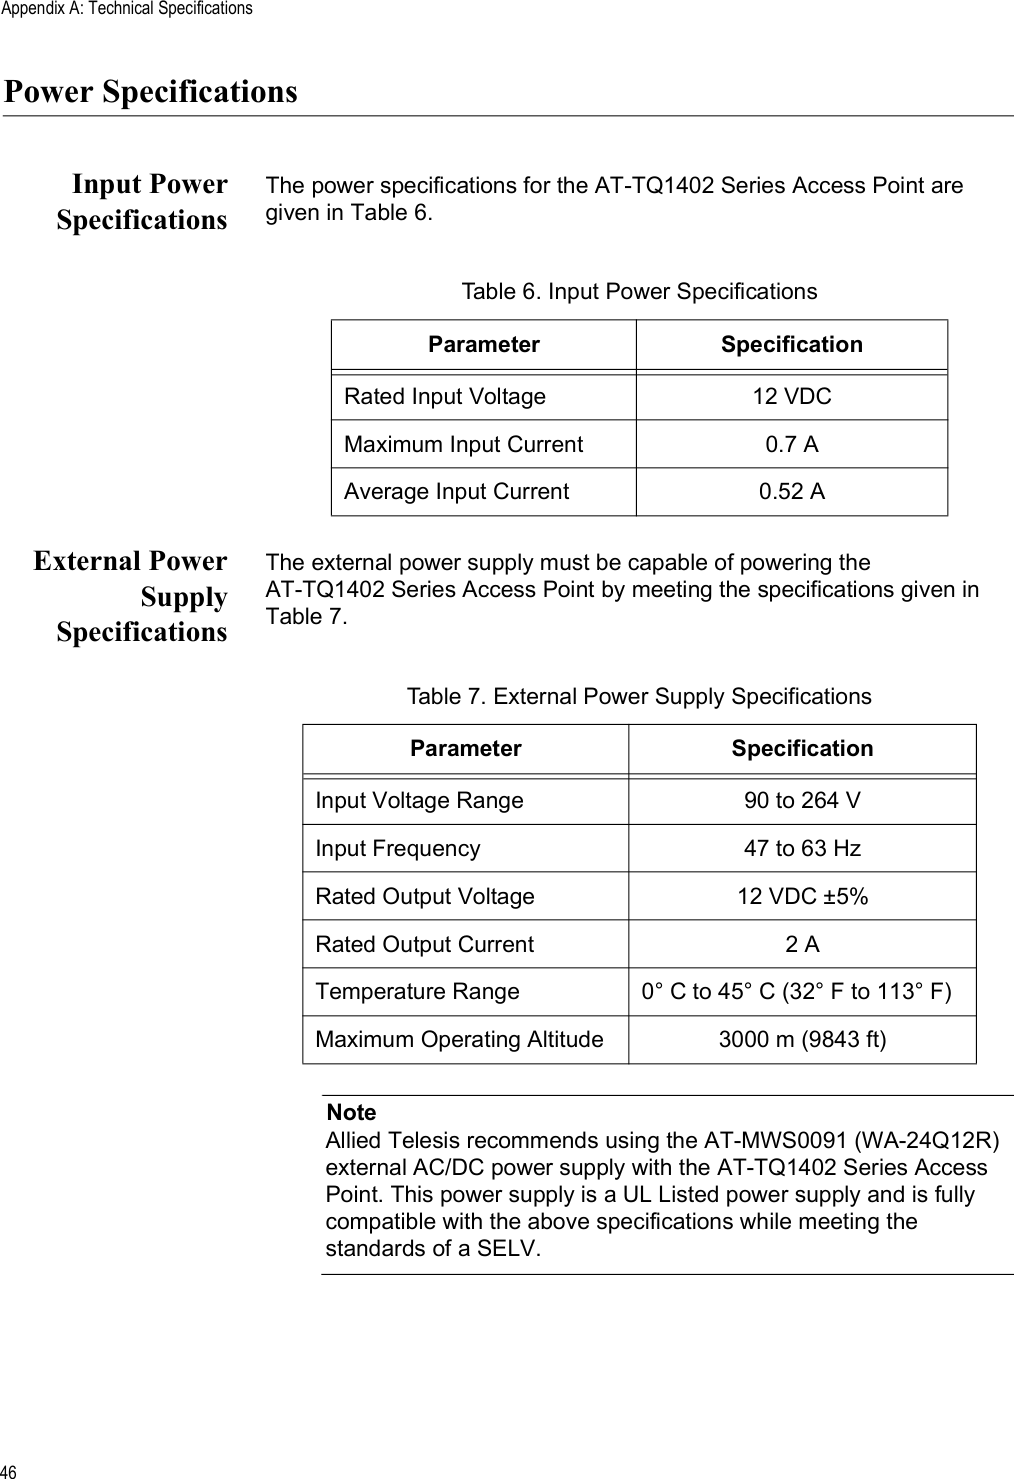 Appendix A: Technical Specifications46Power SpecificationsInput PowerSpecificationsThe power specifications for the AT-TQ1402 Series Access Point are given in Table 6.External PowerSupplySpecificationsThe external power supply must be capable of powering the AT-TQ1402 Series Access Point by meeting the specifications given in Table 7.NoteAllied Telesis recommends using the AT-MWS0091 (WA-24Q12R) external AC/DC power supply with the AT-TQ1402 Series Access Point. This power supply is a UL Listed power supply and is fully compatible with the above specifications while meeting the standards of a SELV. Table 6. Input Power SpecificationsParameter SpecificationRated Input Voltage 12 VDCMaximum Input Current 0.7 AAverage Input Current 0.52 ATable 7. External Power Supply SpecificationsParameter SpecificationInput Voltage Range 90 to 264 VInput Frequency 47 to 63 HzRated Output Voltage 12 VDC ±5%Rated Output Current 2 ATemperature Range 0° C to 45° C (32° F to 113° F)Maximum Operating Altitude 3000 m (9843 ft)